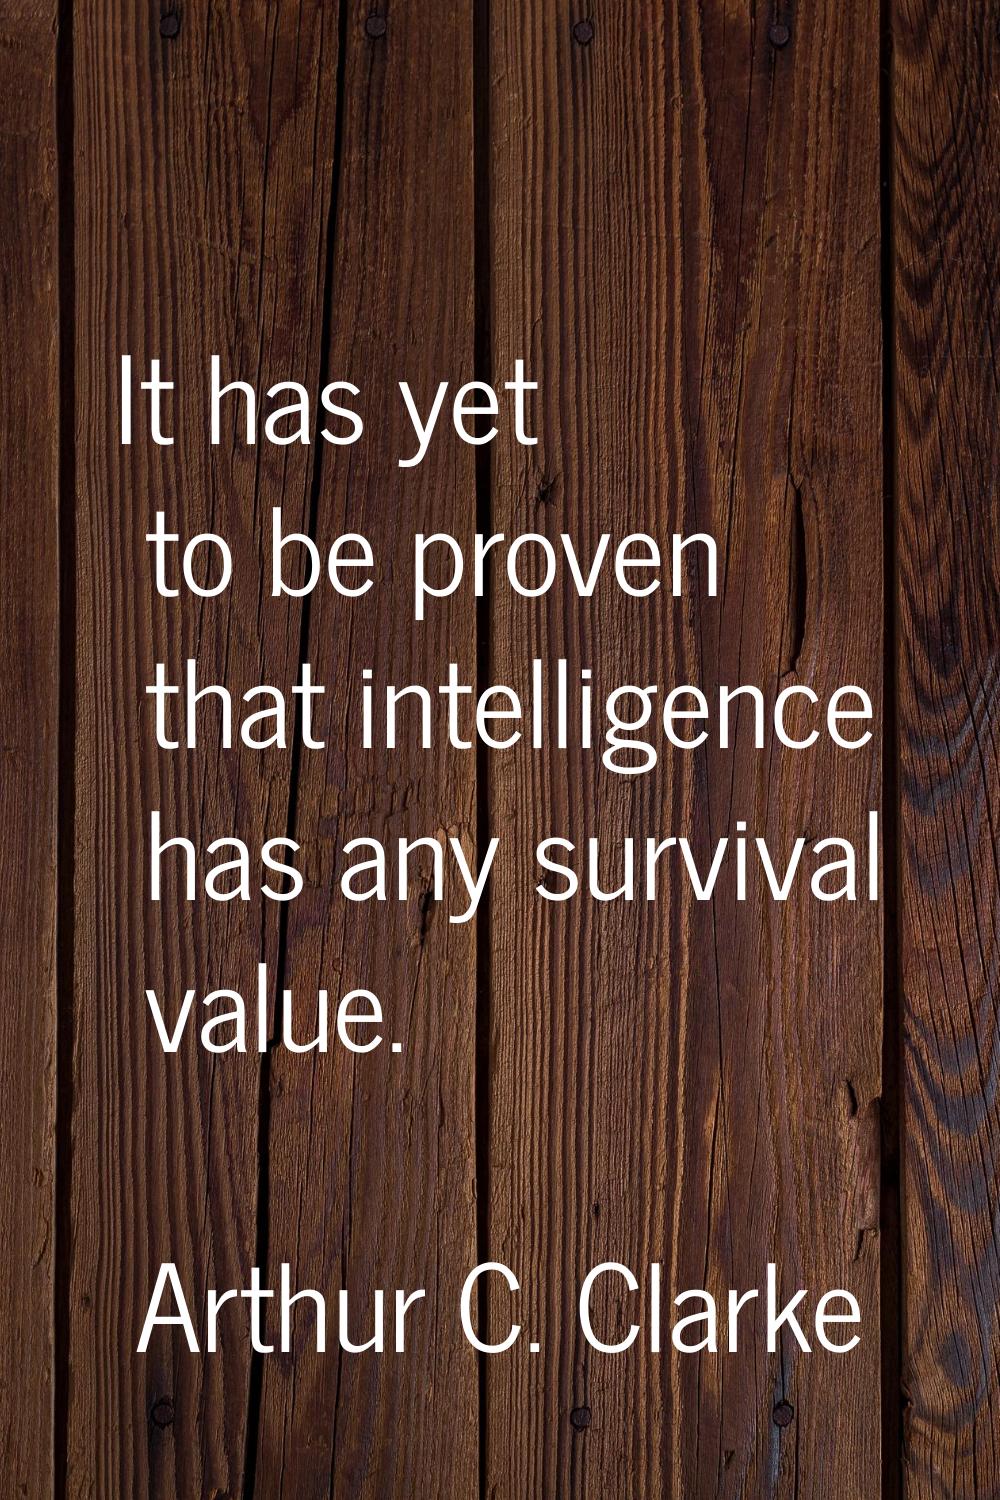 It has yet to be proven that intelligence has any survival value.